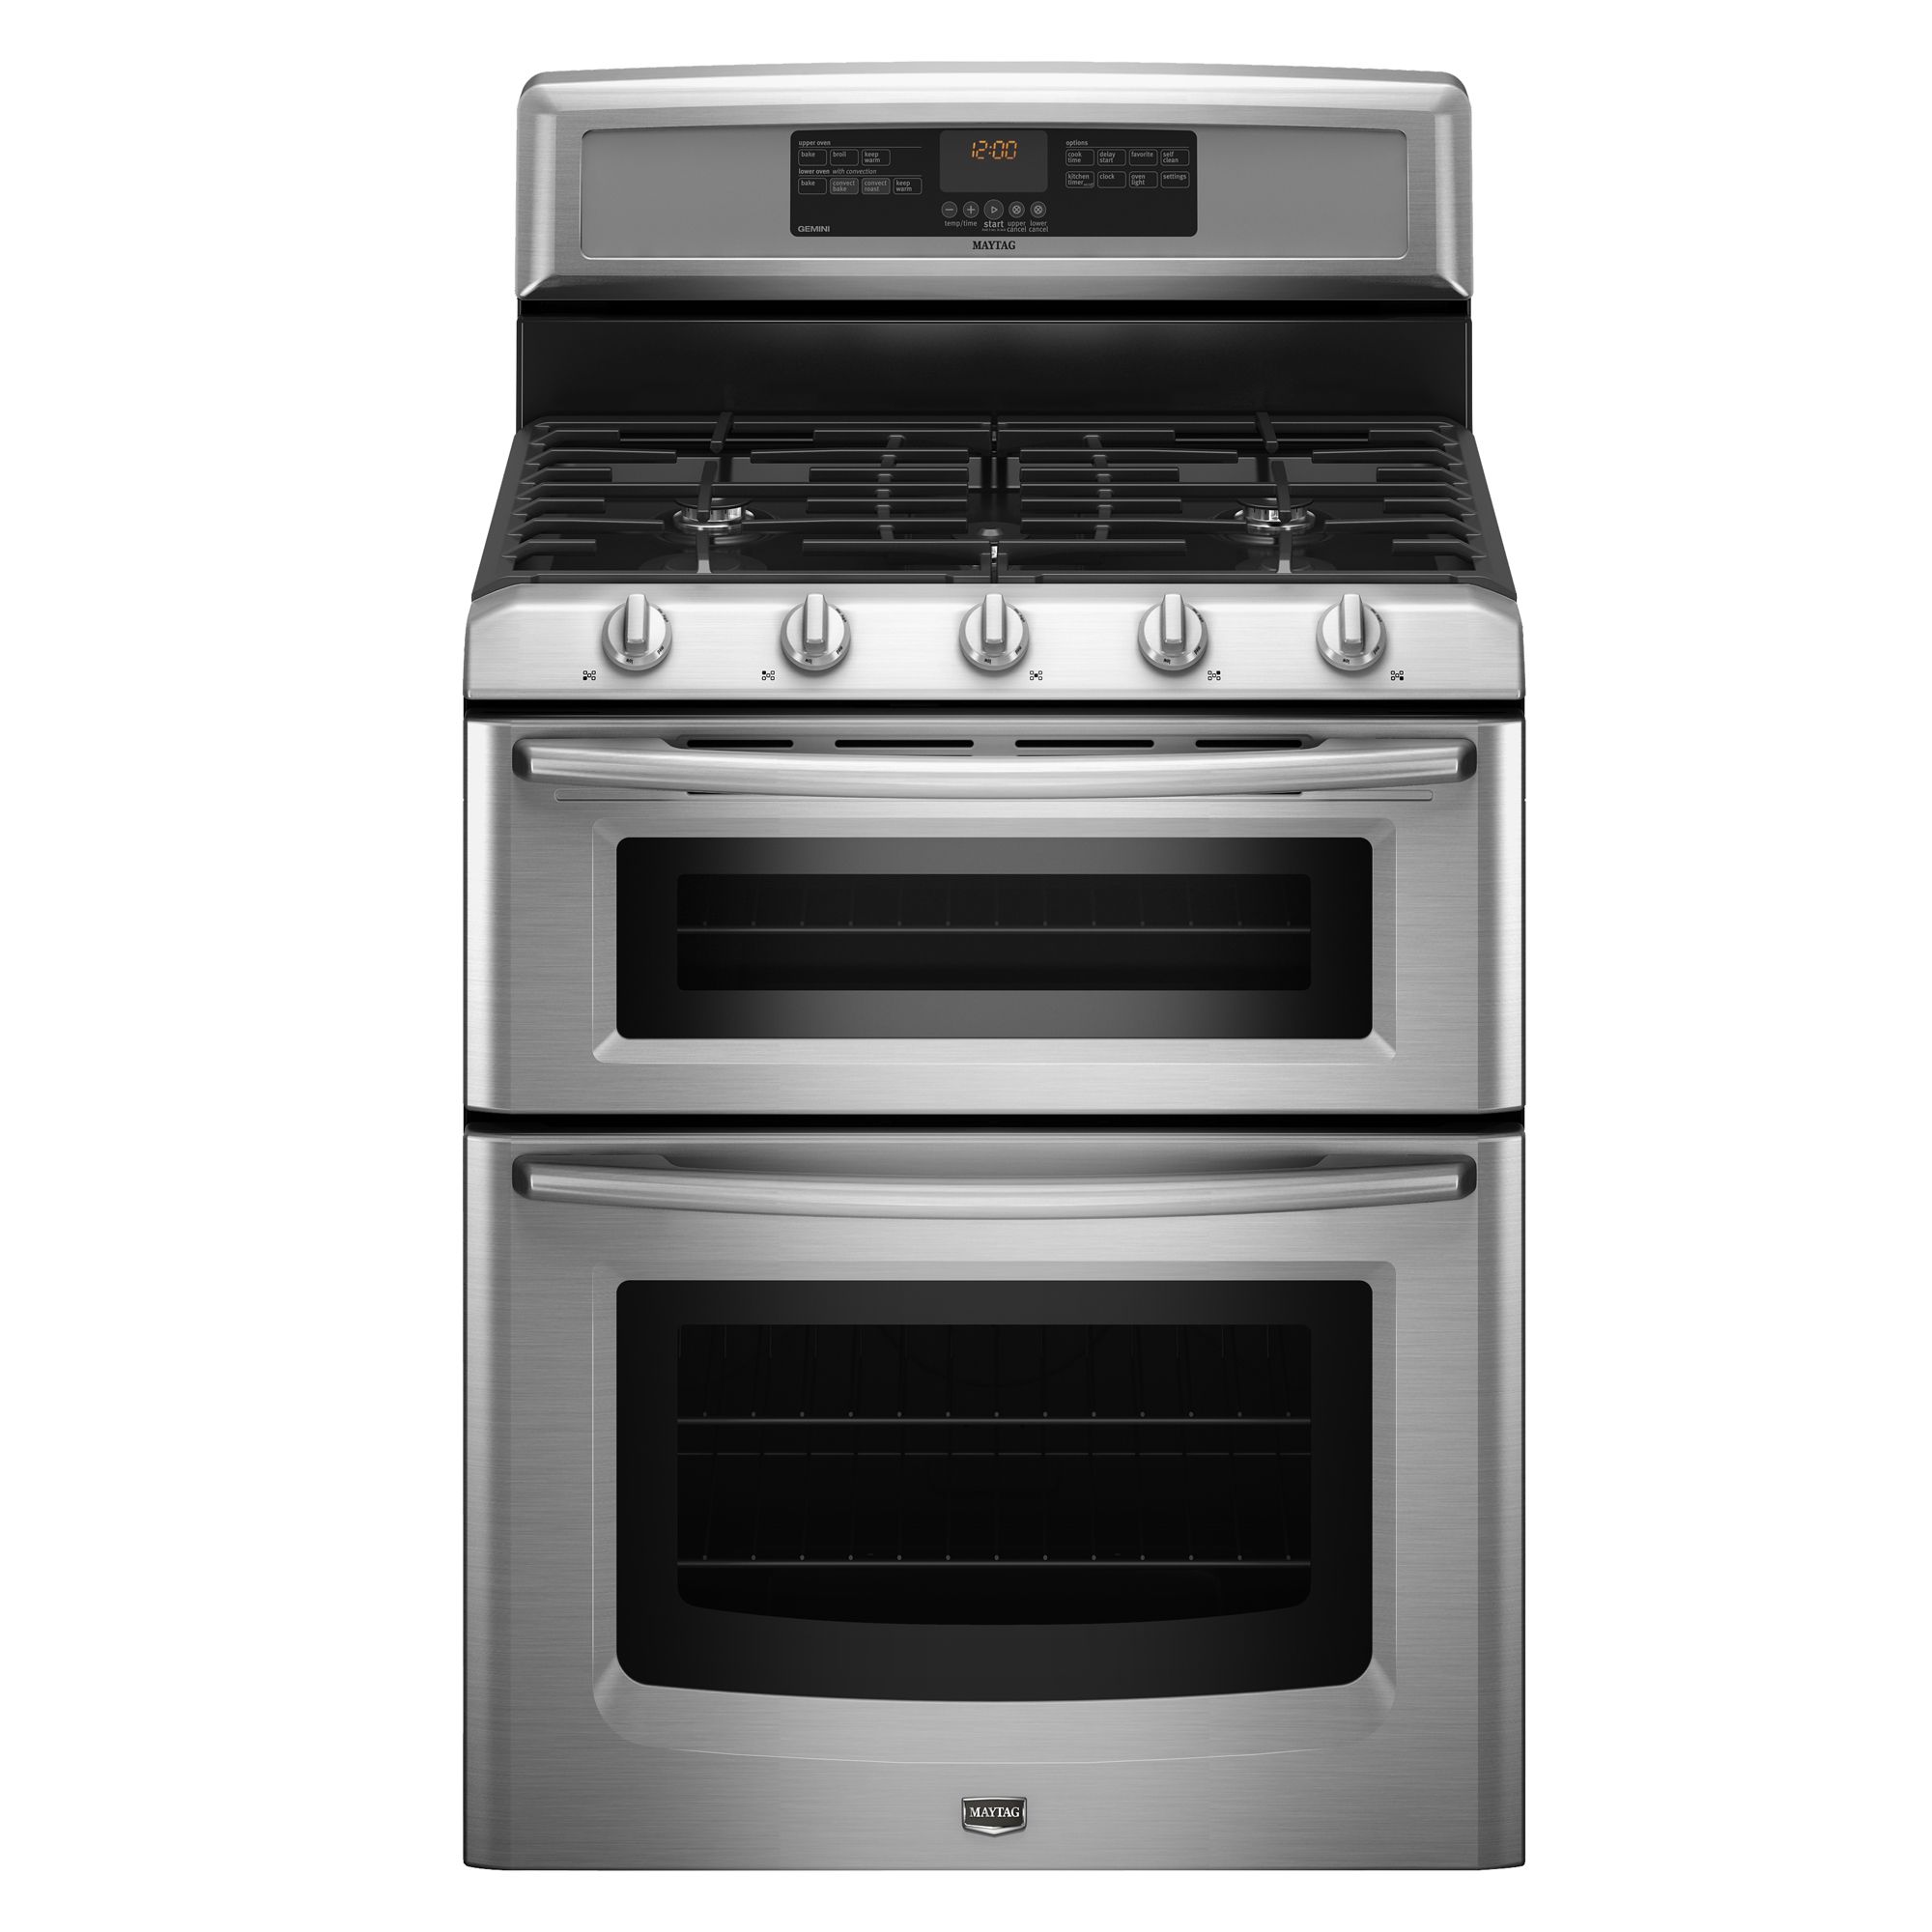 Maytag MGT8775XS 6 cu. ft. Double-Oven Gas Range - Stainless Steel Stainless Steel Double Oven Gas Range